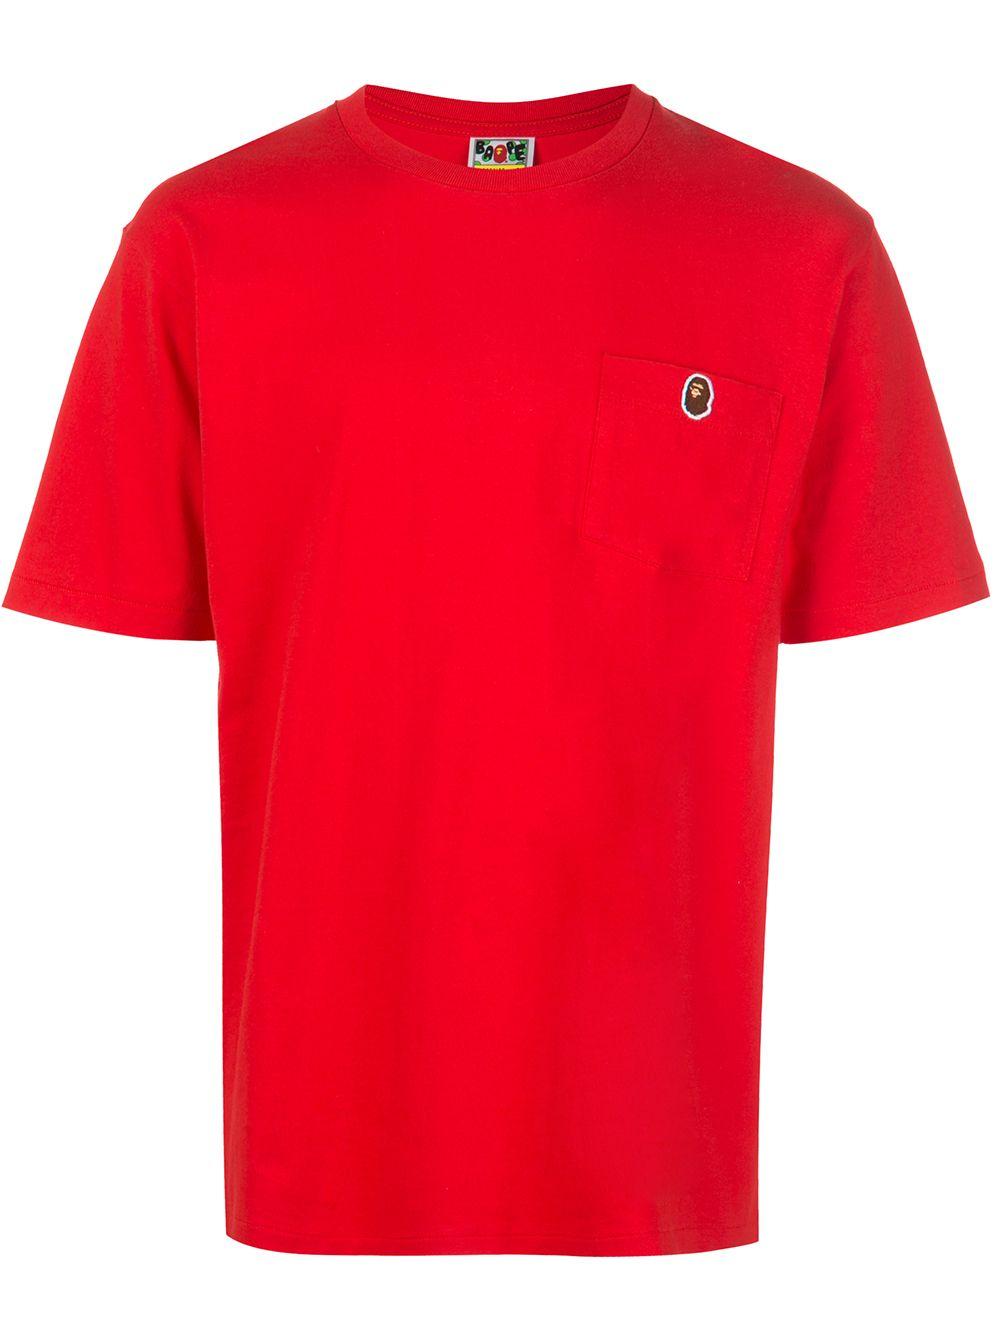 A Bathing Ape Cotton One Point Pocket T-shirt in Red for Men - Lyst